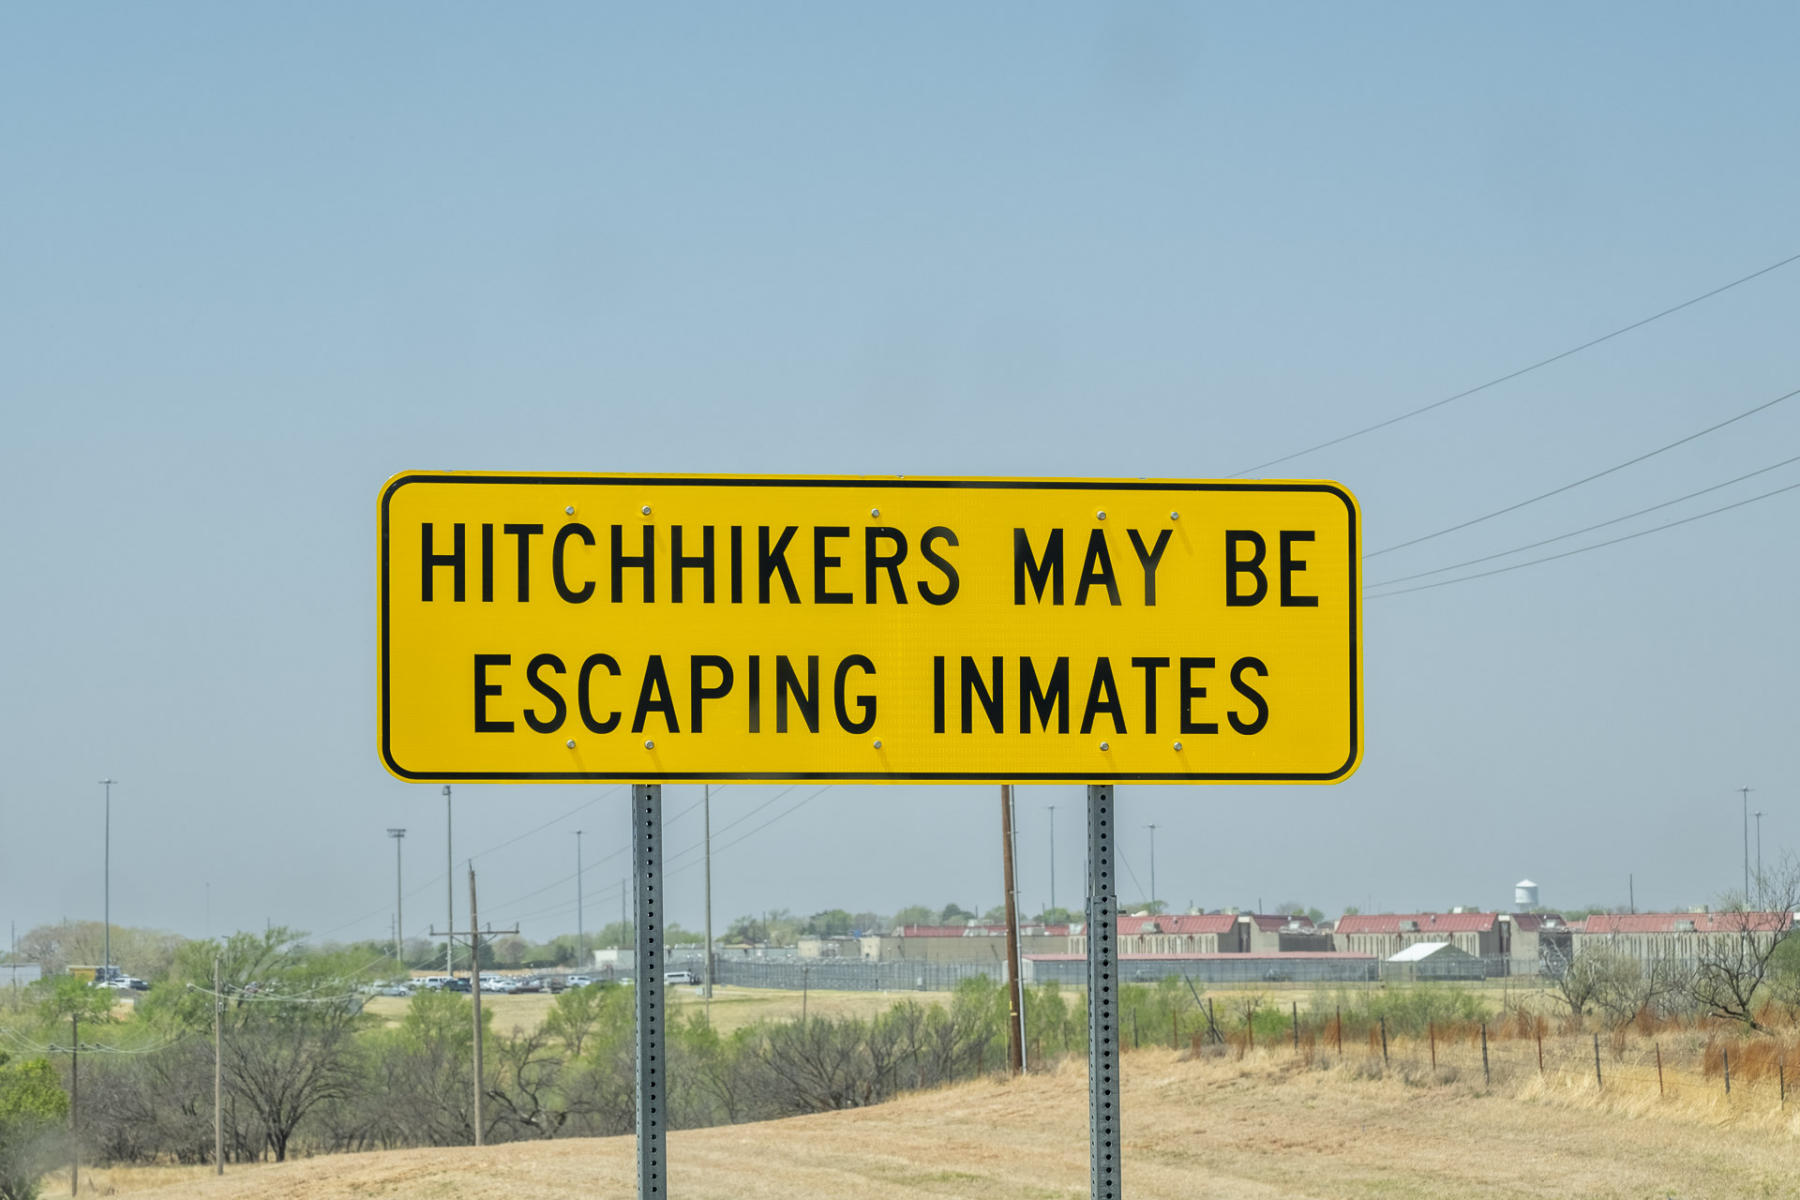  : Hitchhikers May Be Escaping Inmates : Richard Dweck